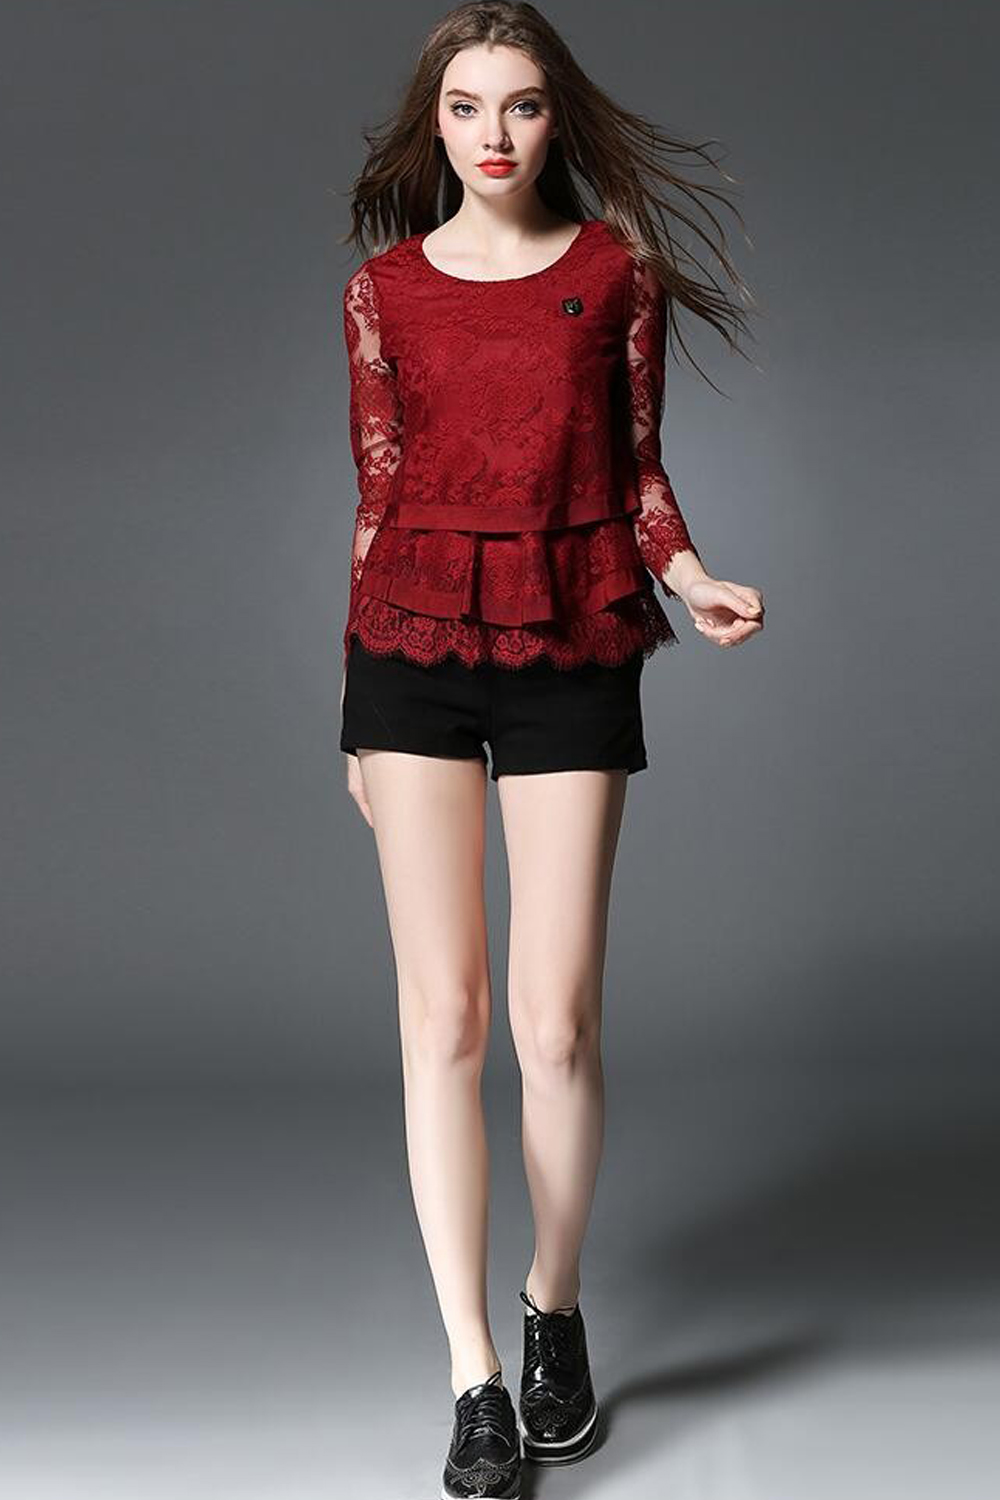 Unomatch Women Long Sheer Flower Sleeves Three Layered Lace Top Red Vine